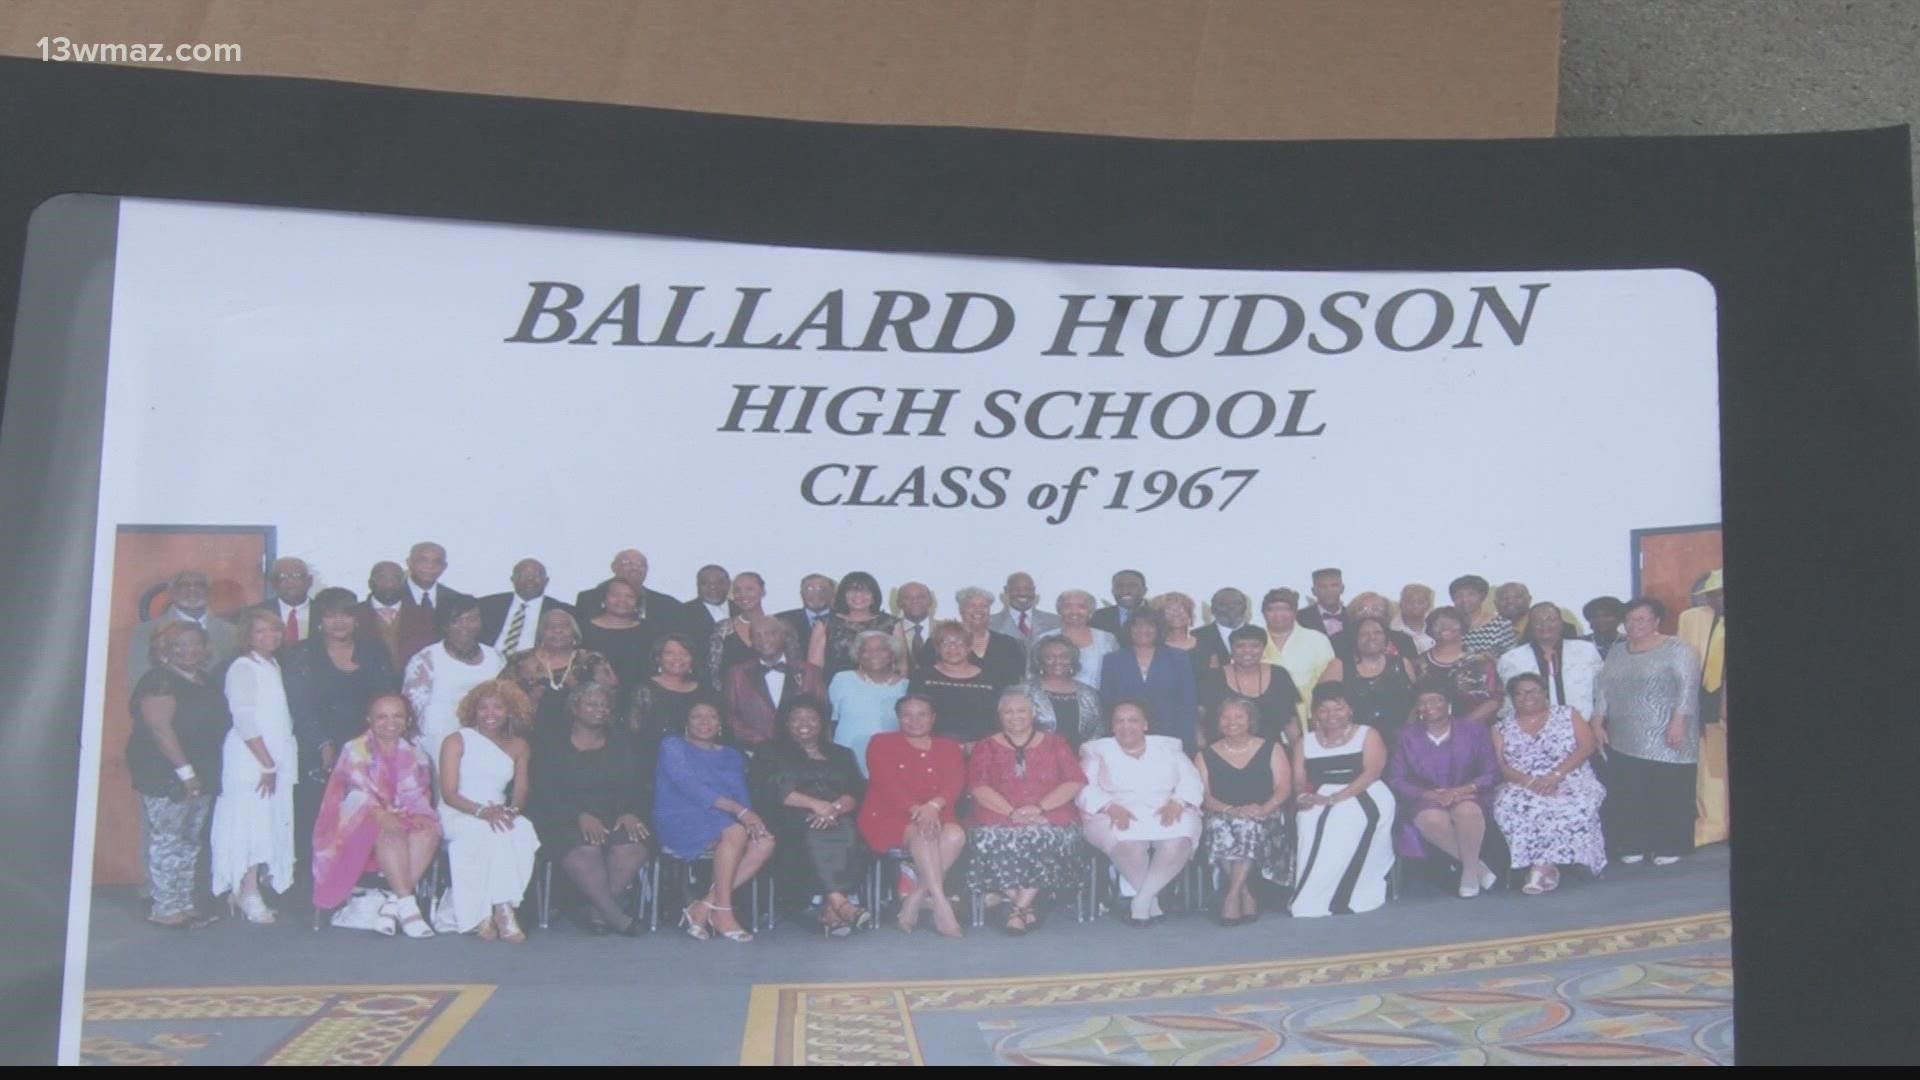 Ballard-Hudson High School was built as the only high school for Blacks in 1949. The Class of 1967 is getting together this weekend for their 55th reunion.